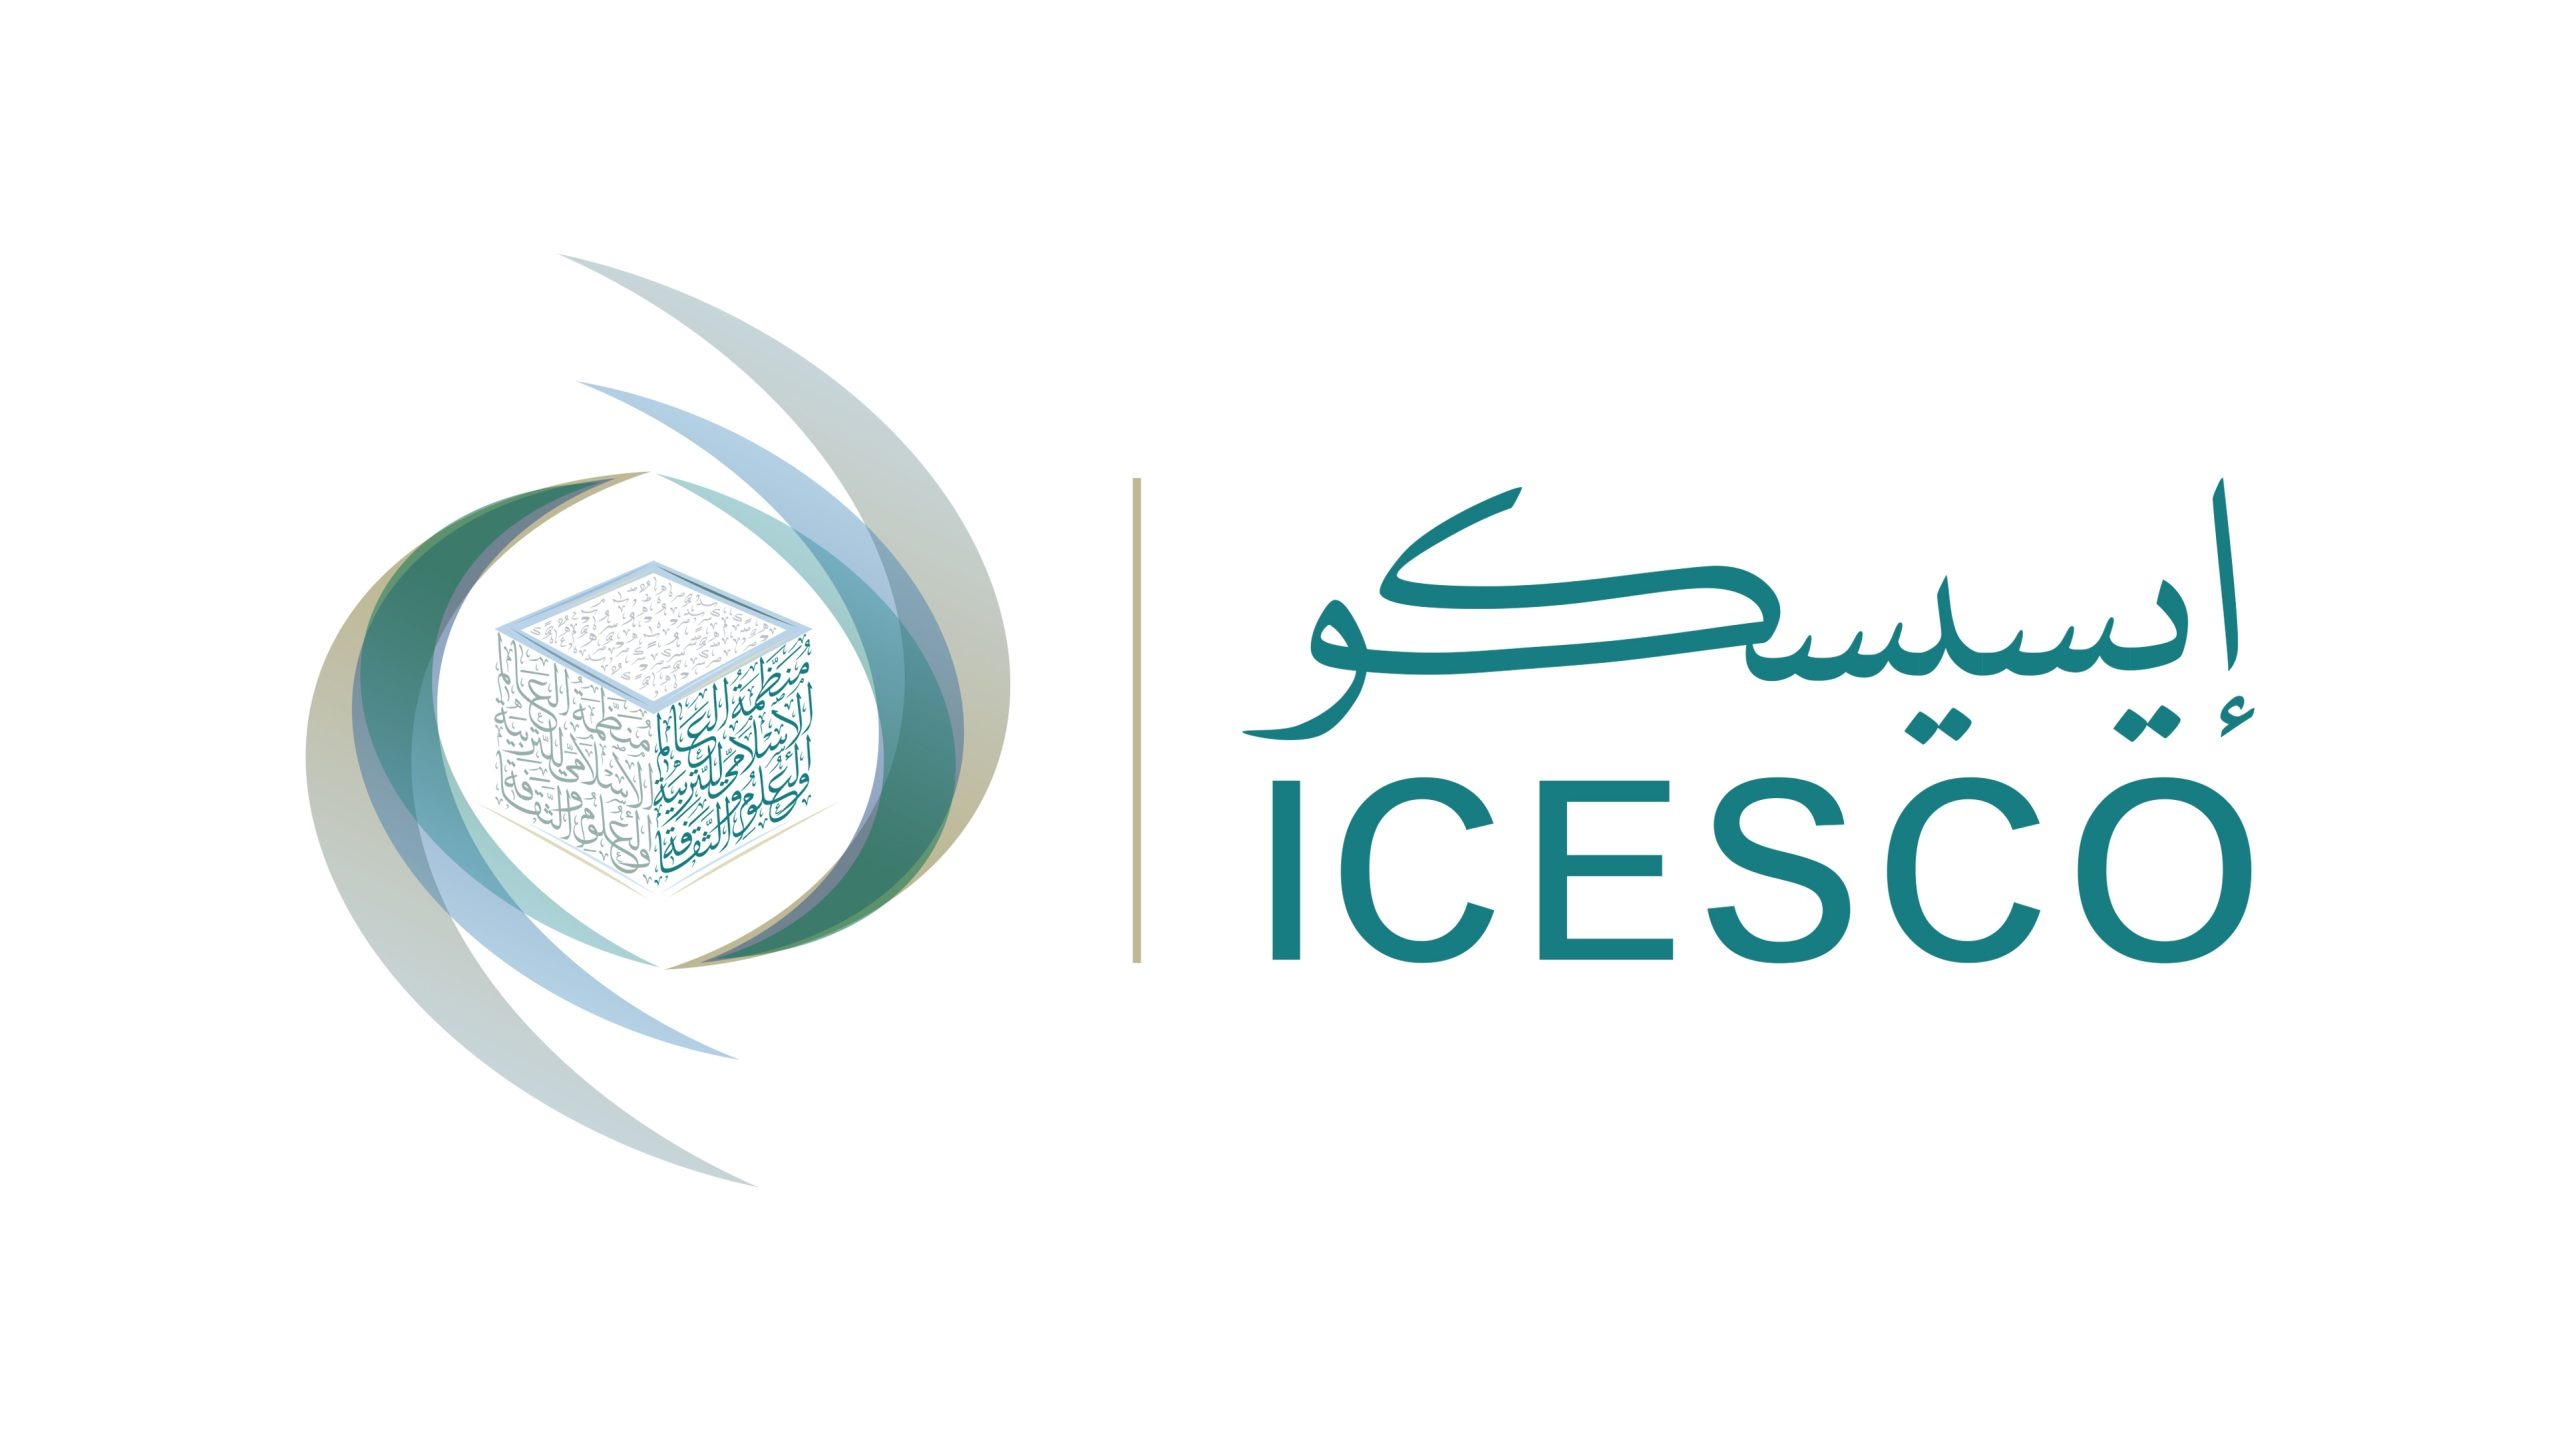 ICESCO Launches Contest to Select and Publish the Best Graphic-Story Script on School Bullying